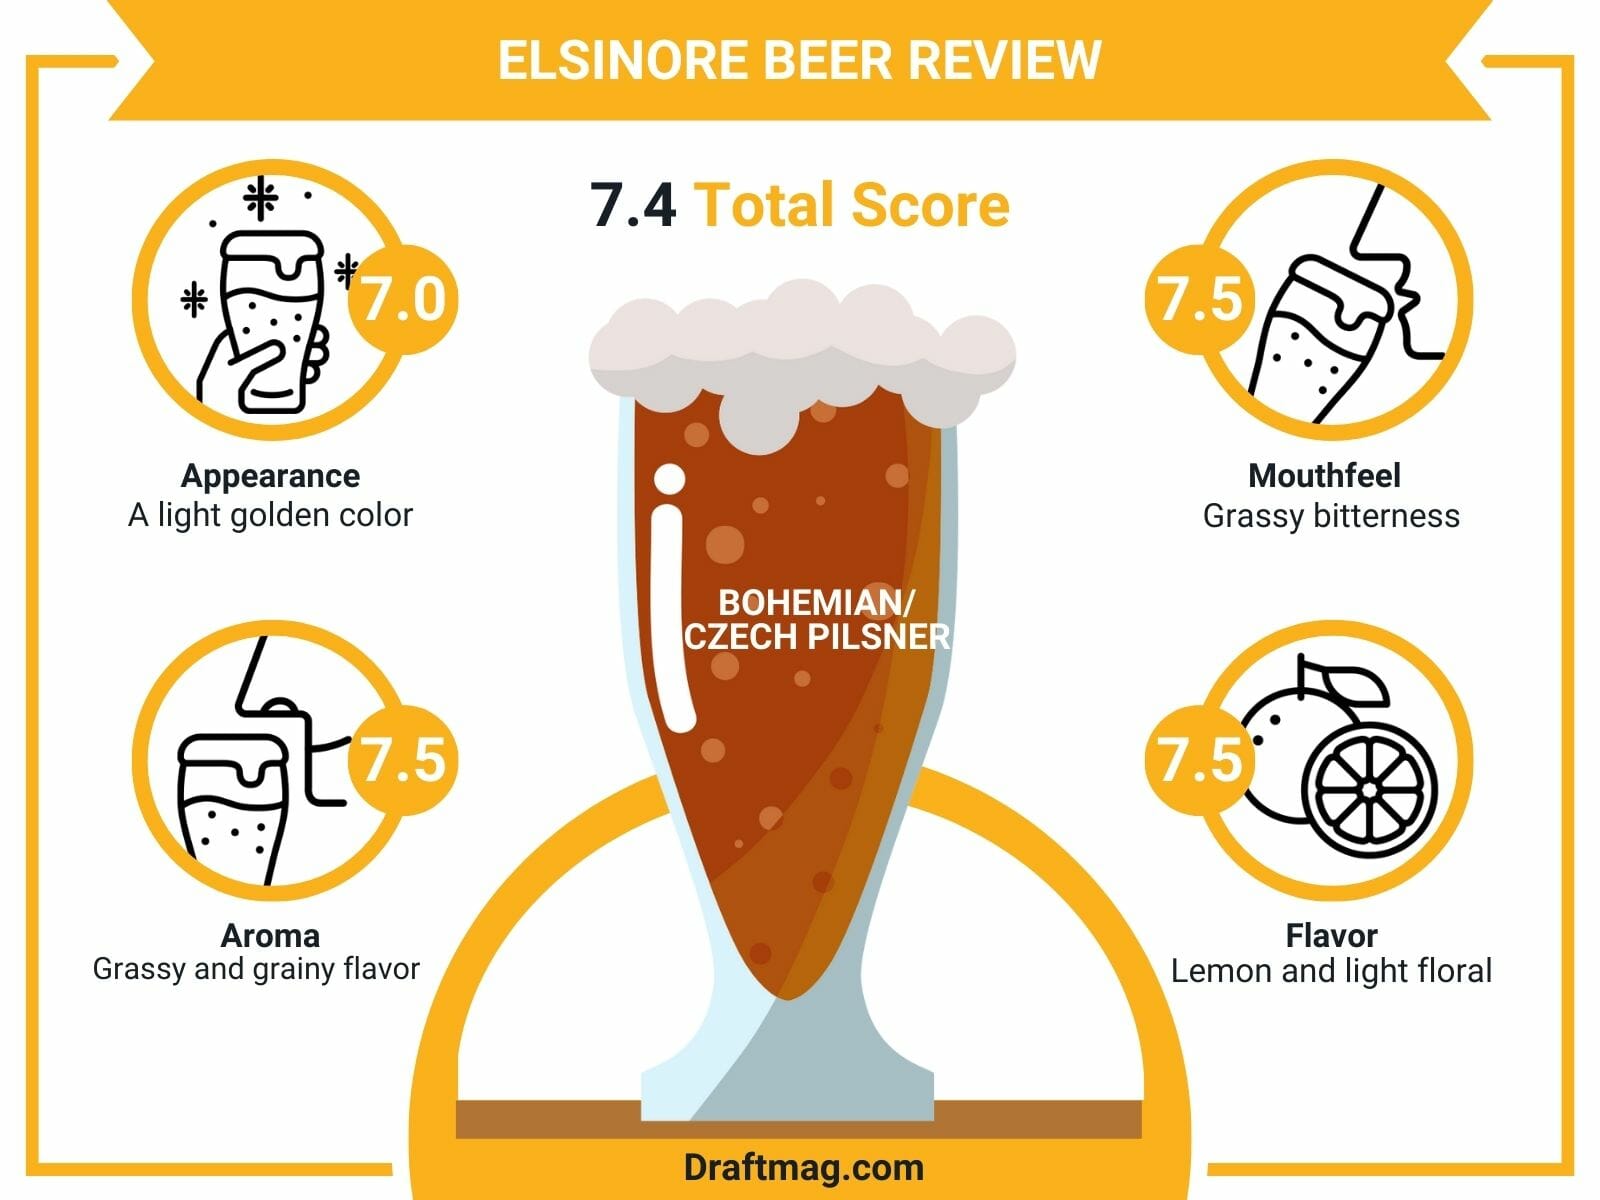 Elsinore Beer Review Infographic